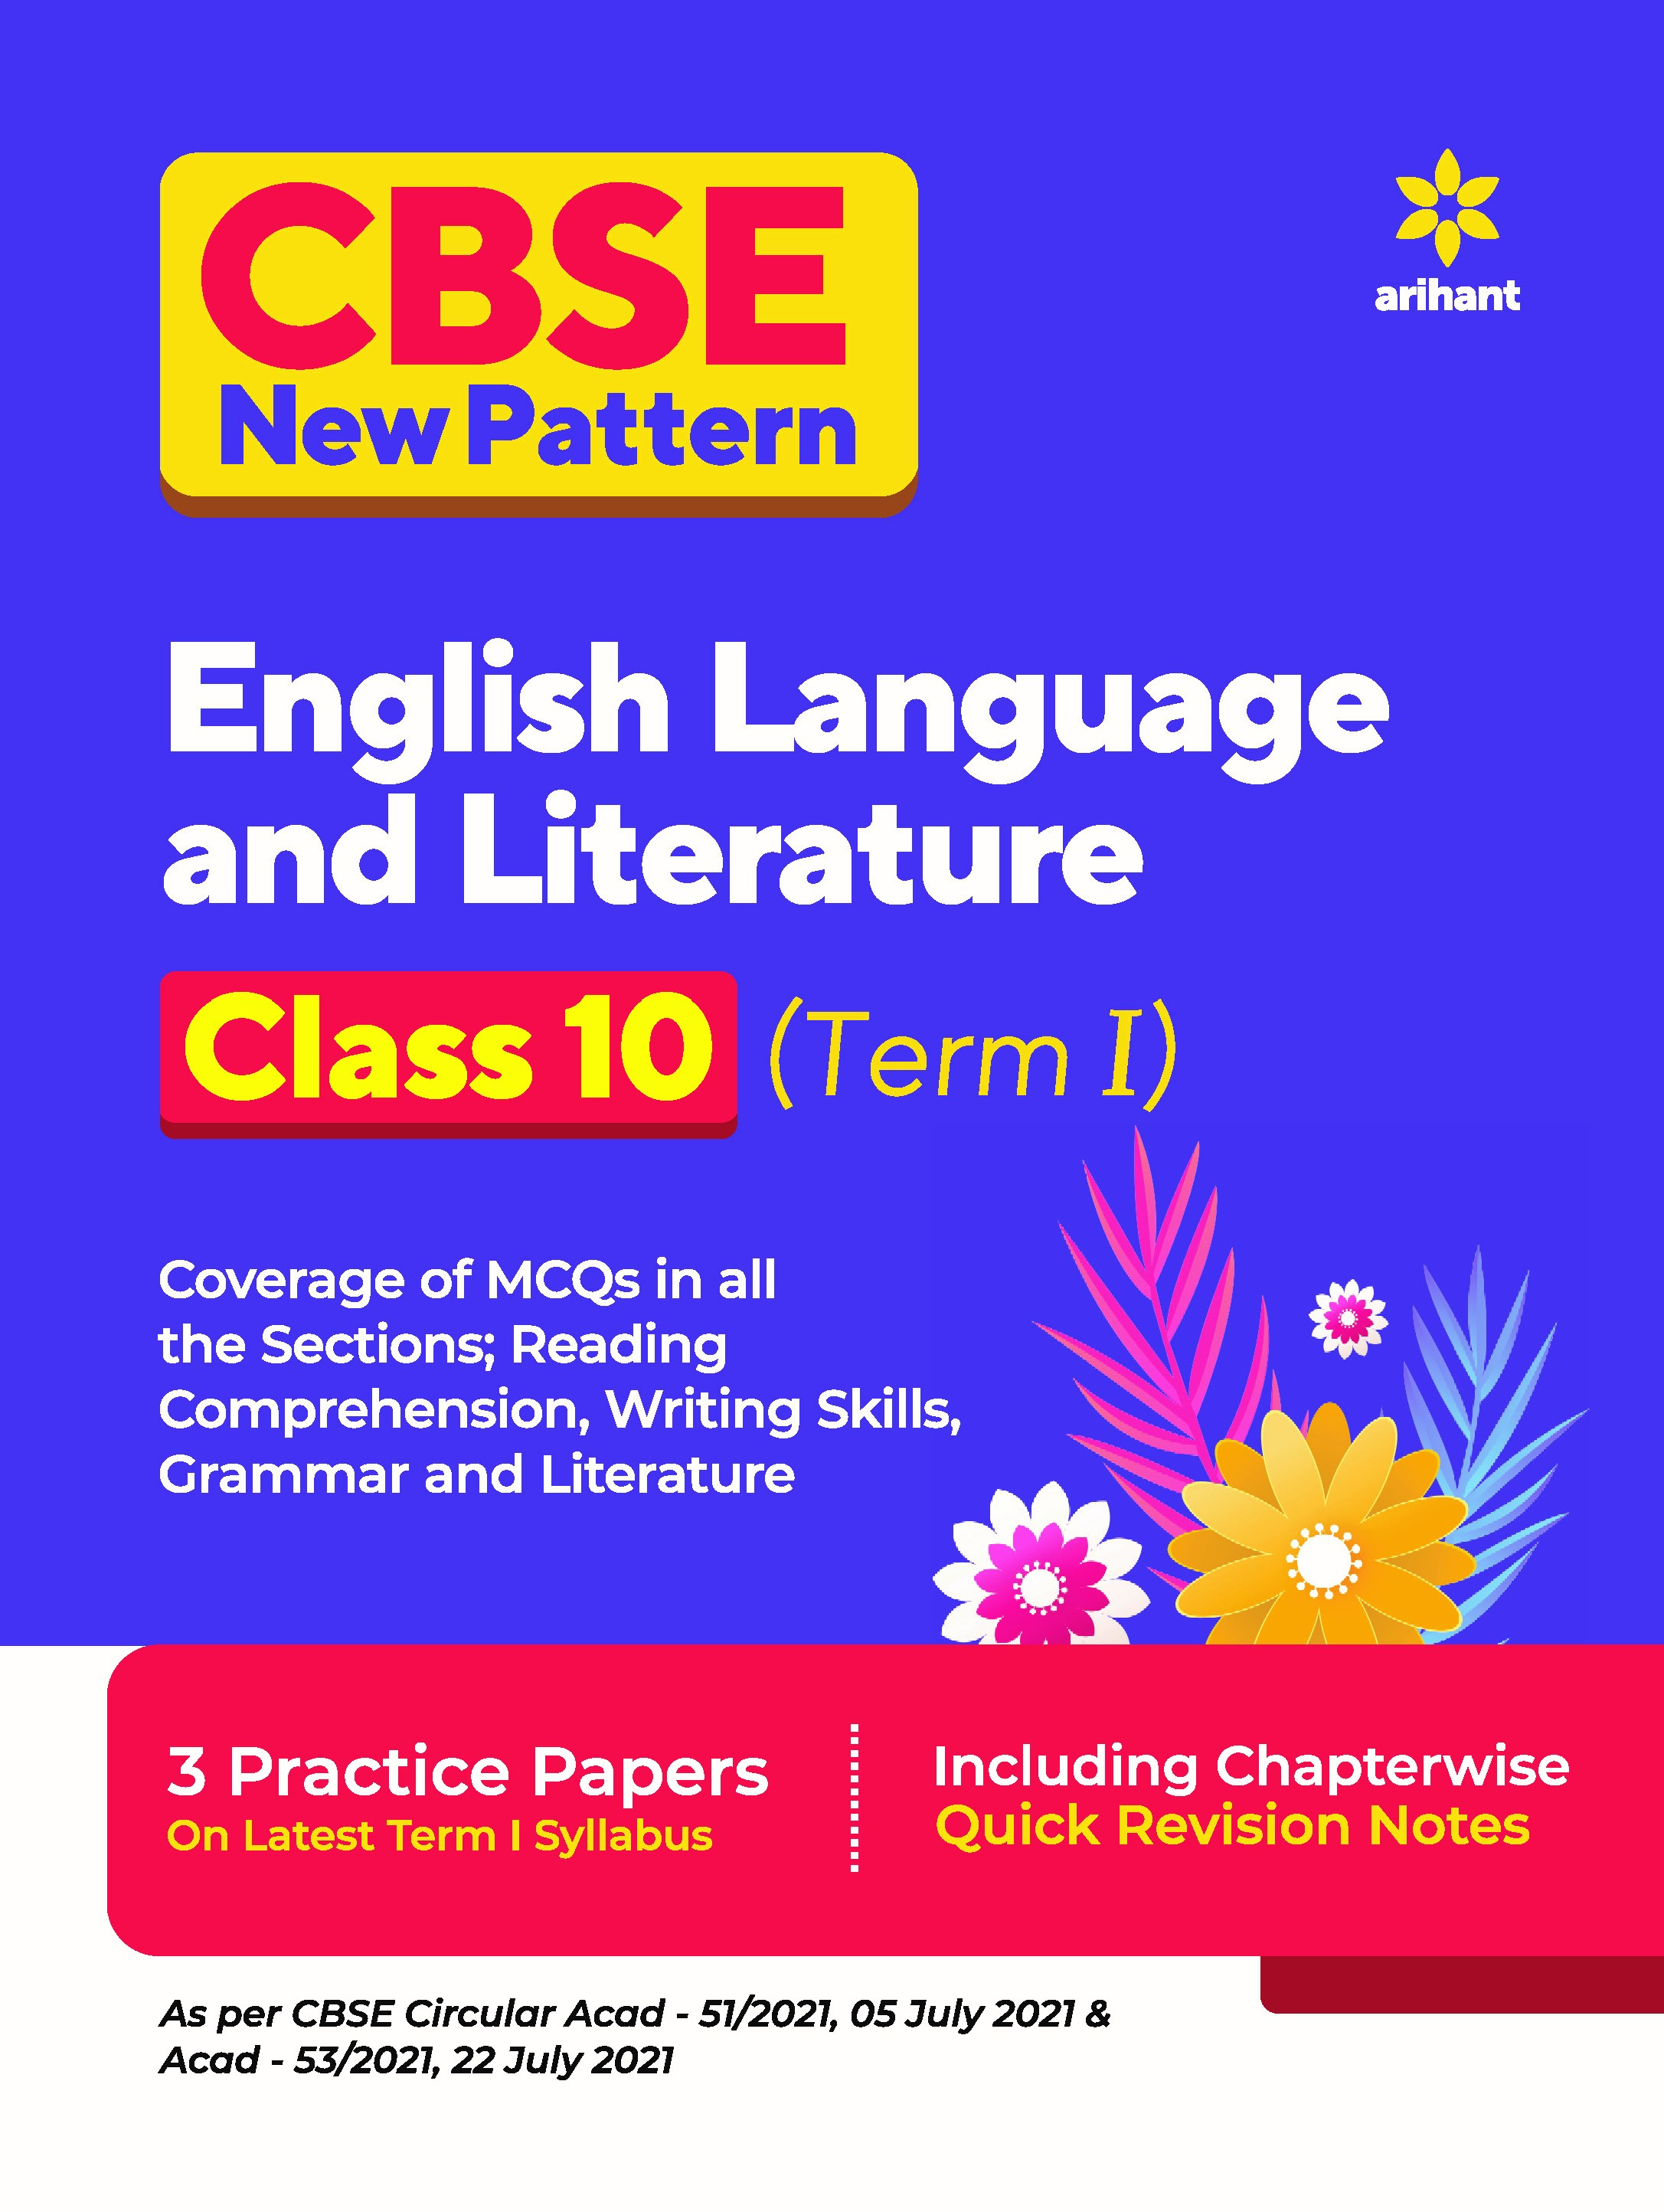 CBSE New Pattern English Language and Literature Class 10 for 2021-22 Exam (MCQs based book for Term 1)